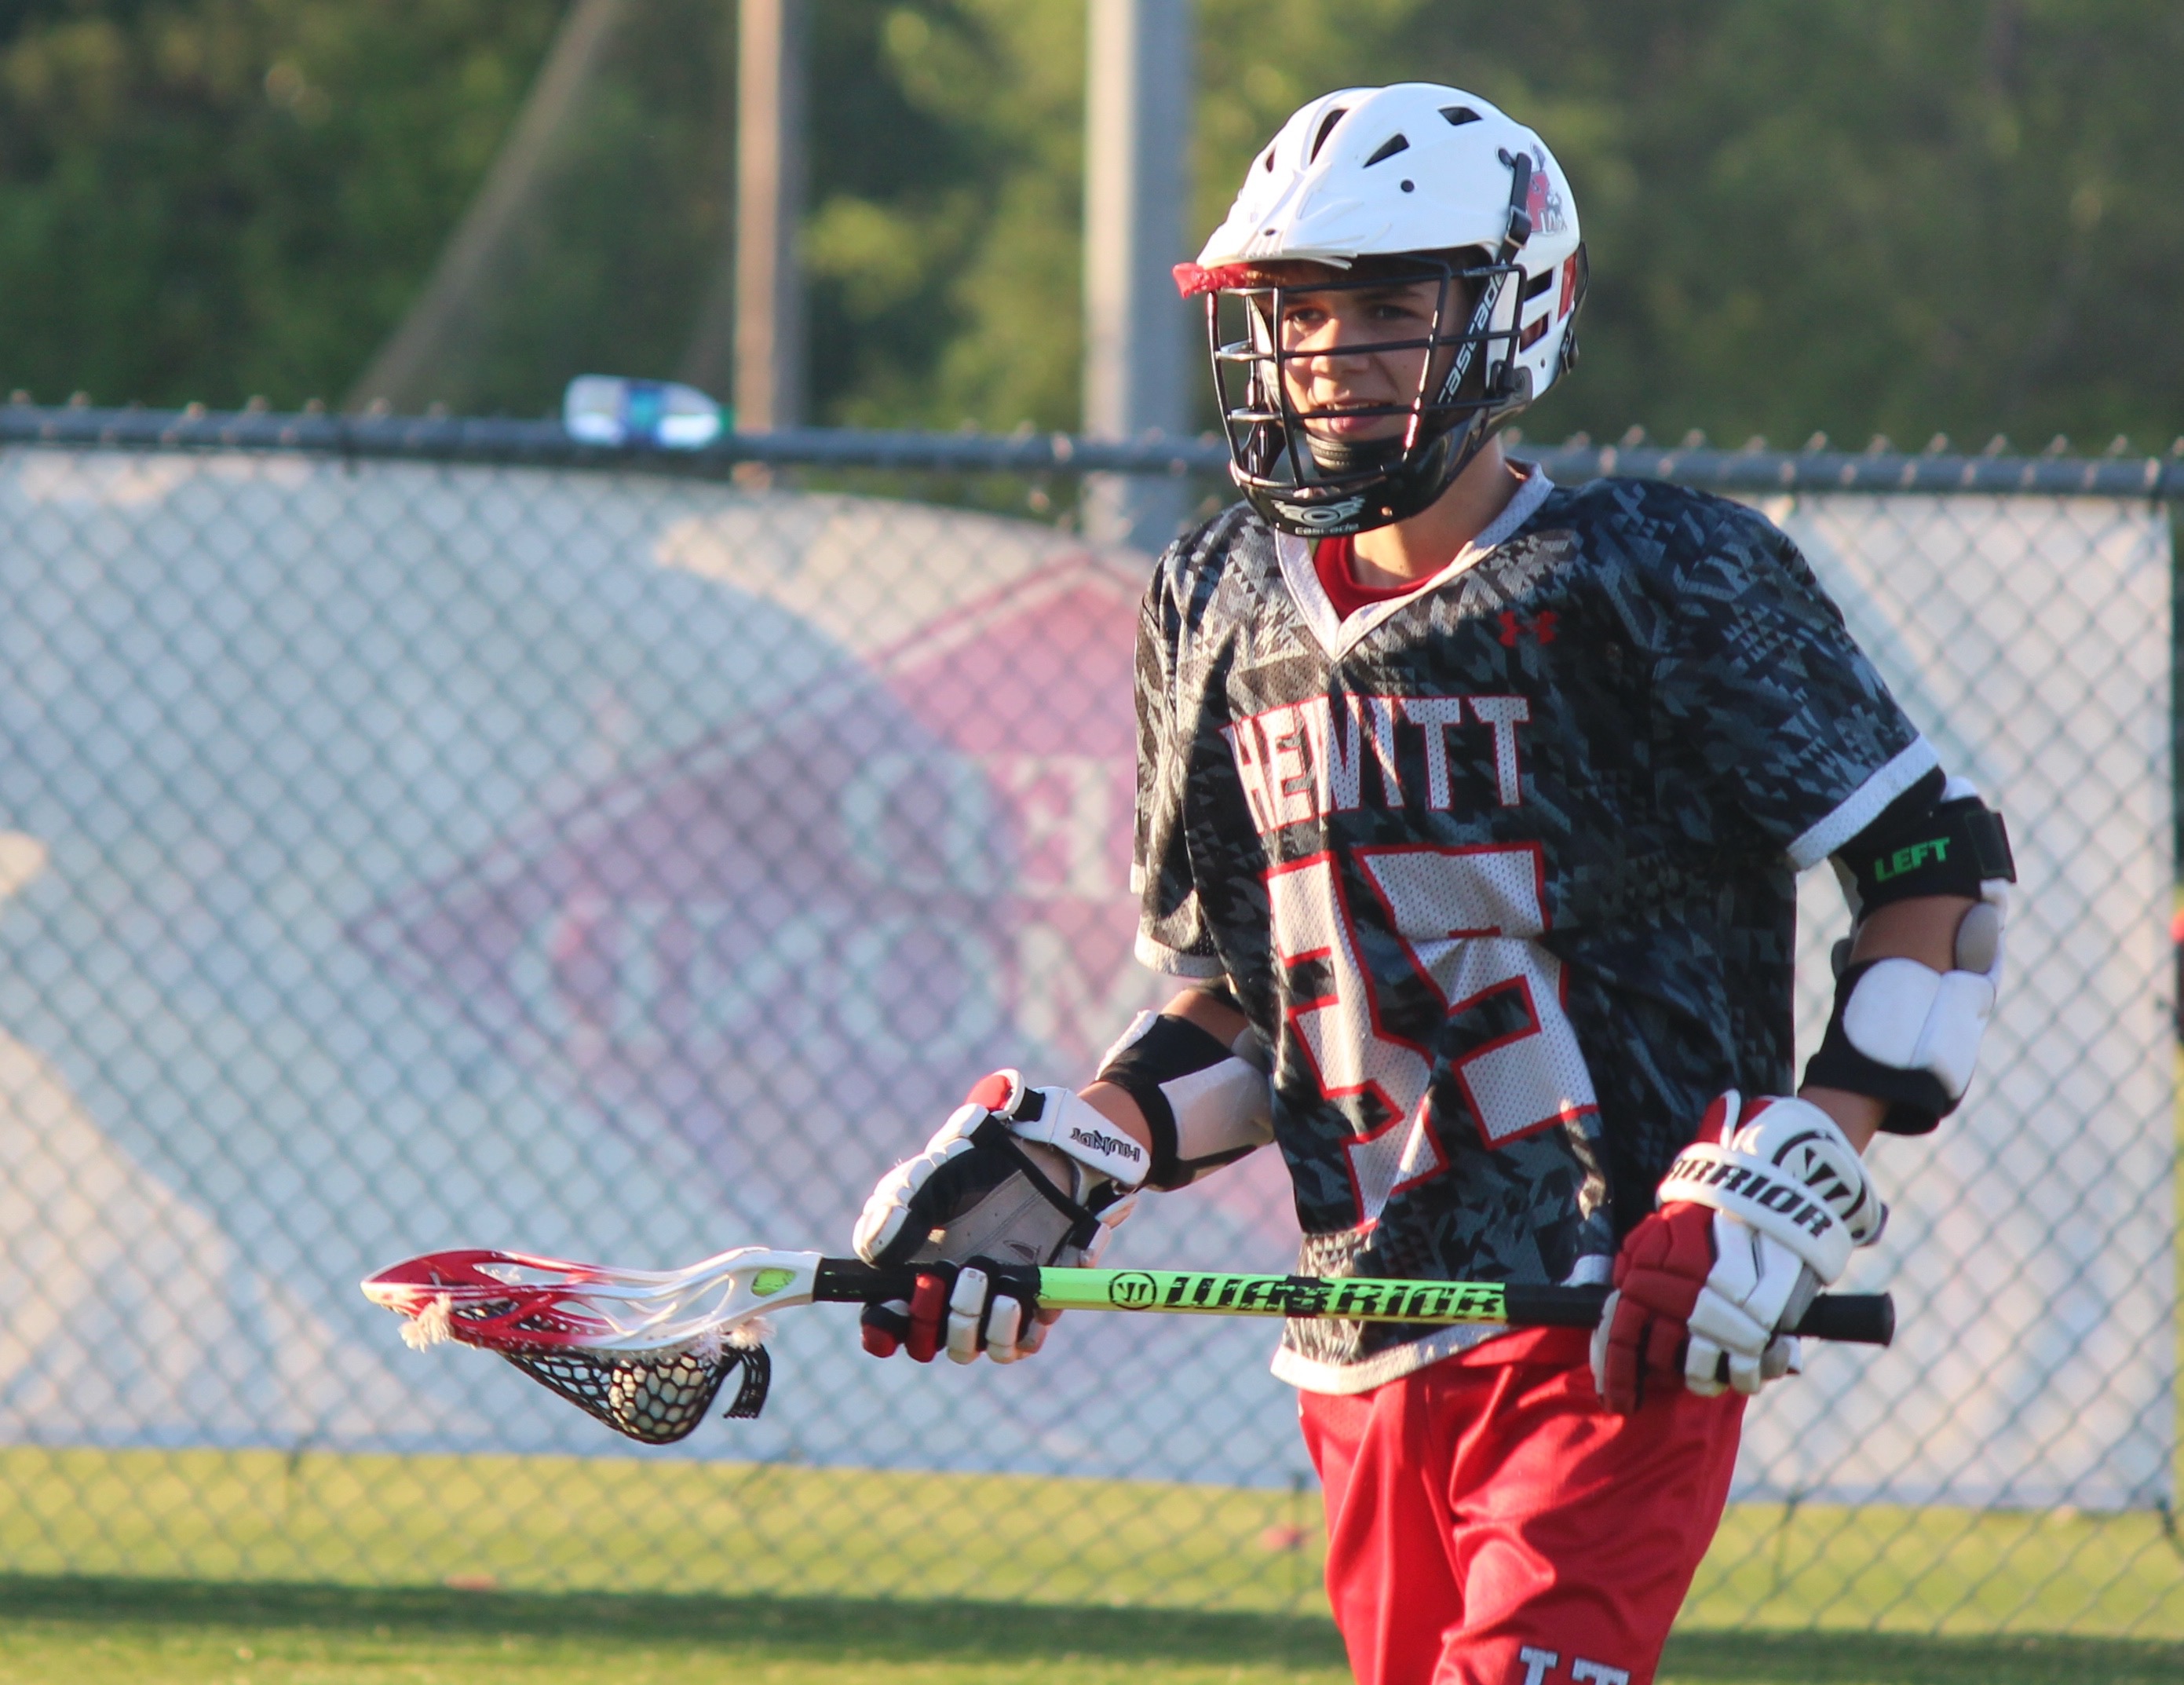 Trussville lacrosse club looking to grow